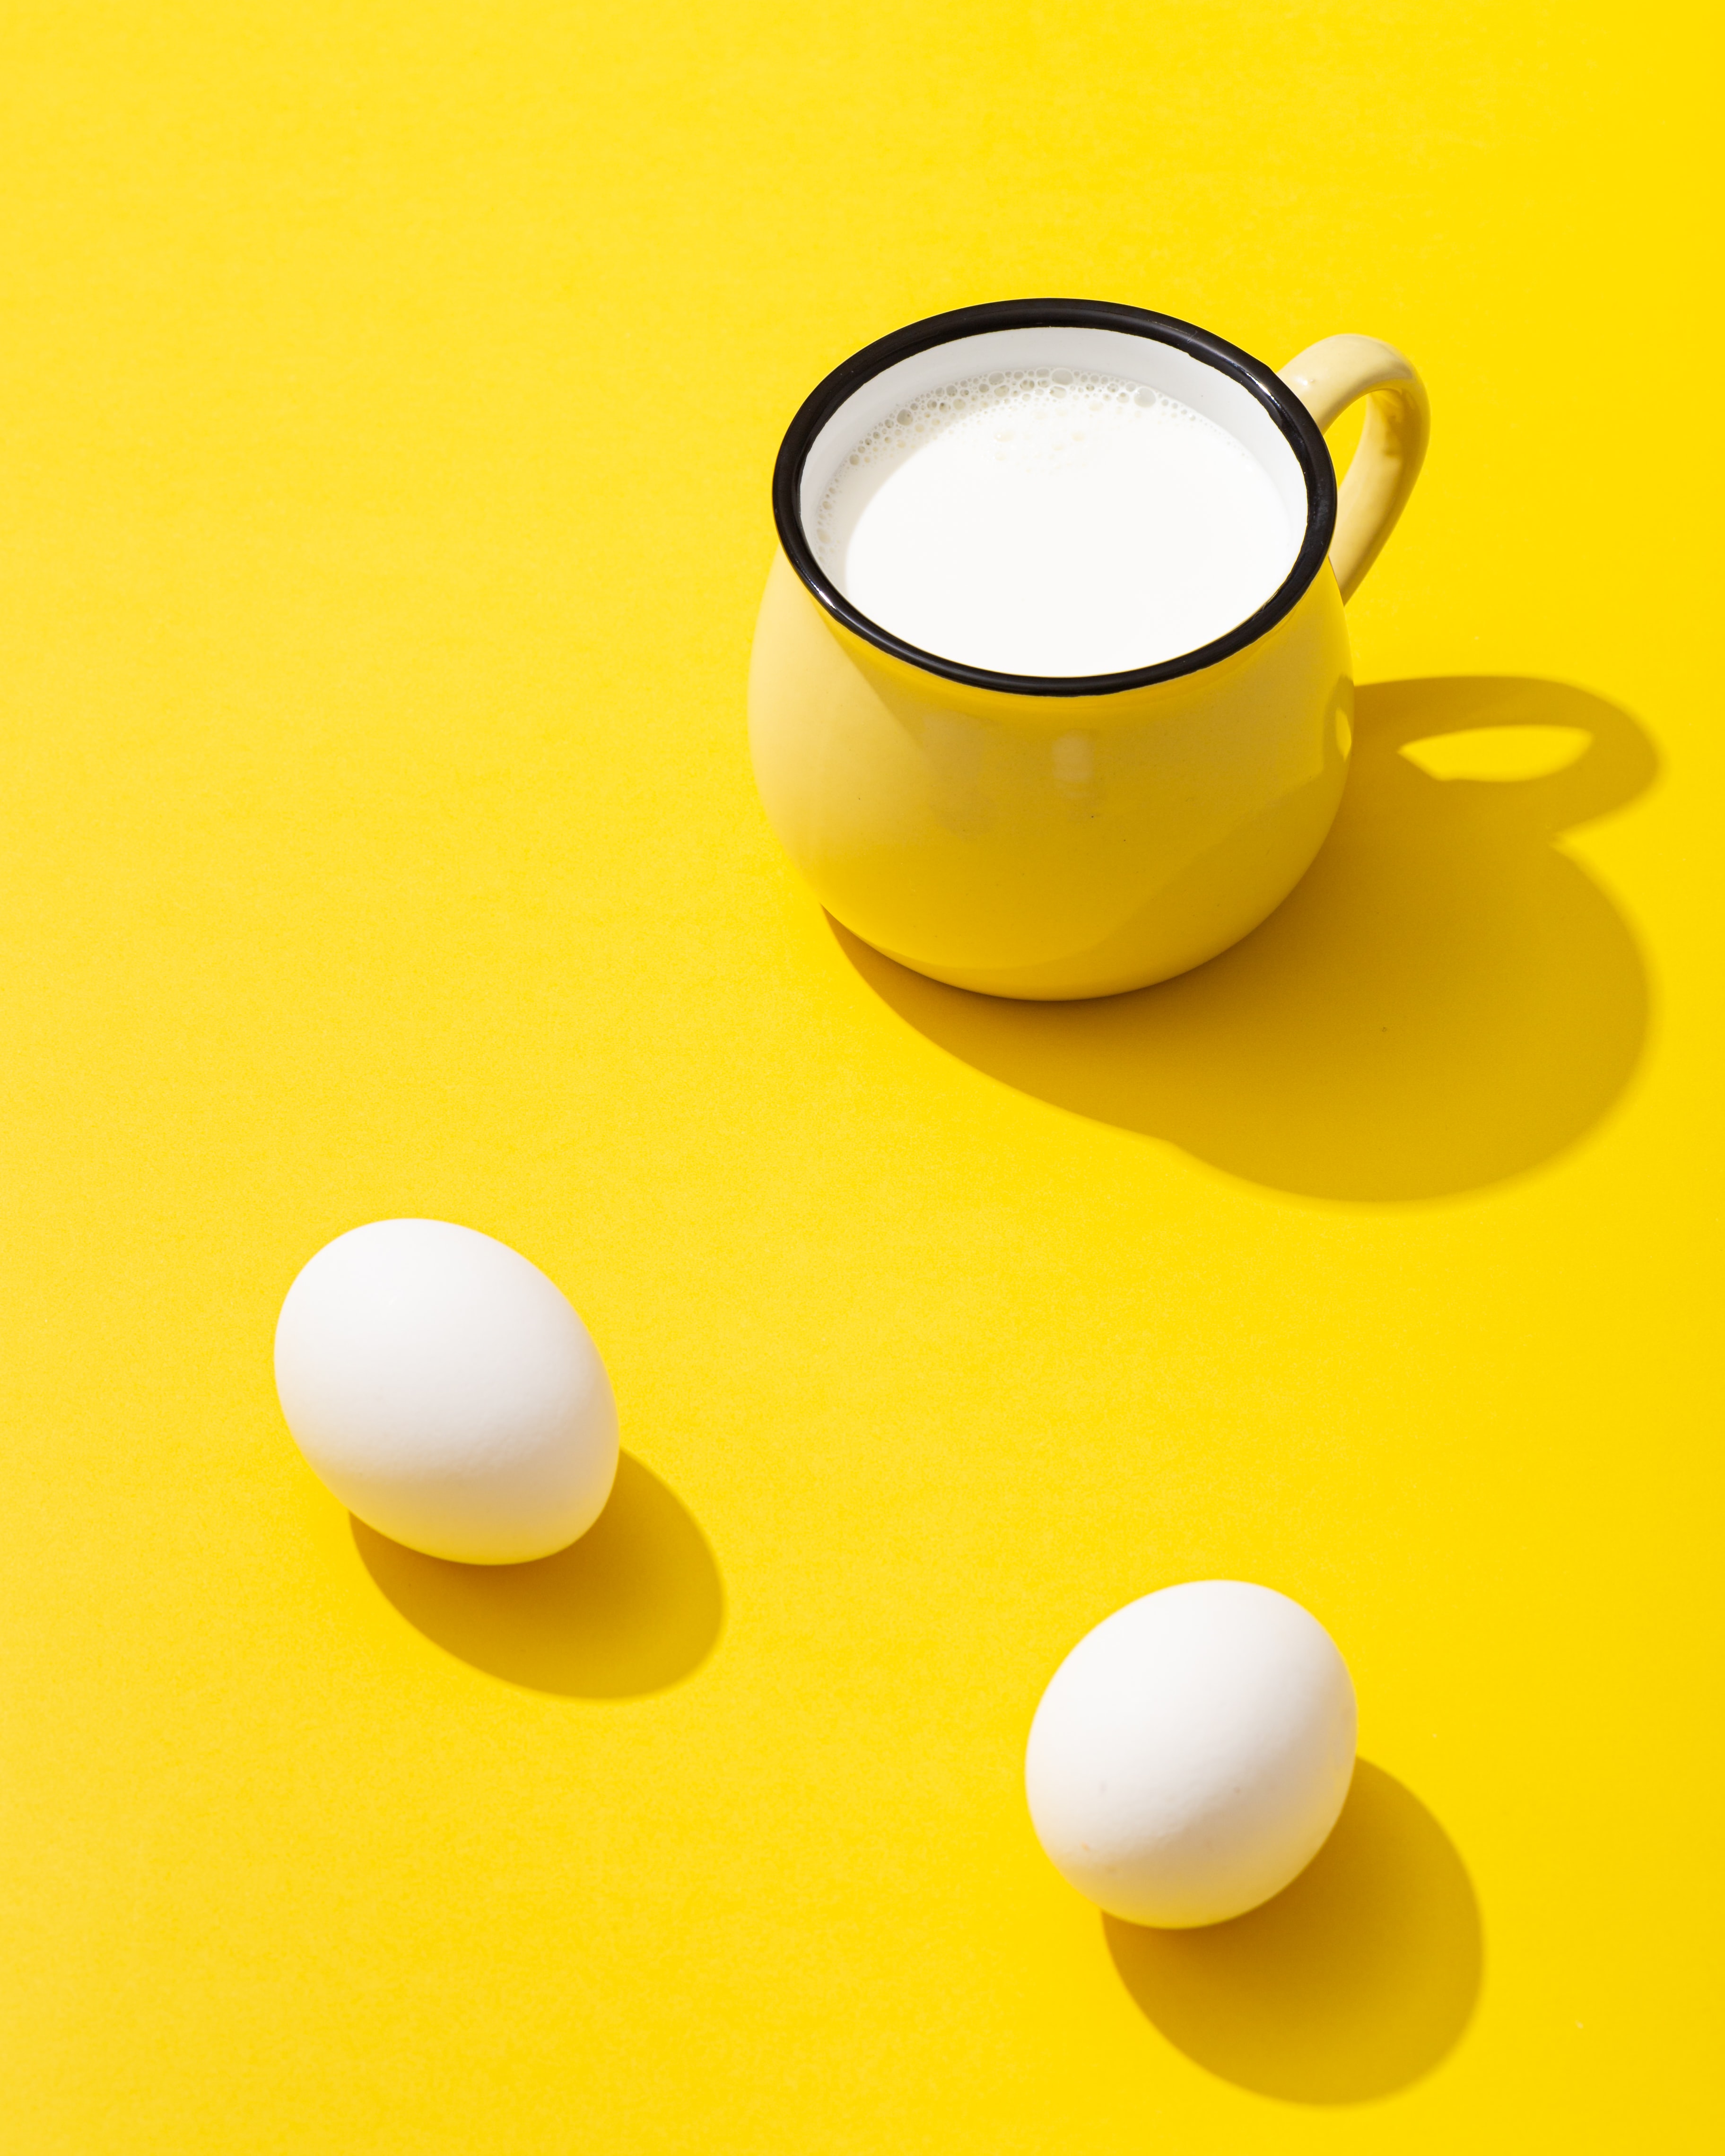 125480 download wallpaper food, eggs, yellow, cup, milk screensavers and pictures for free